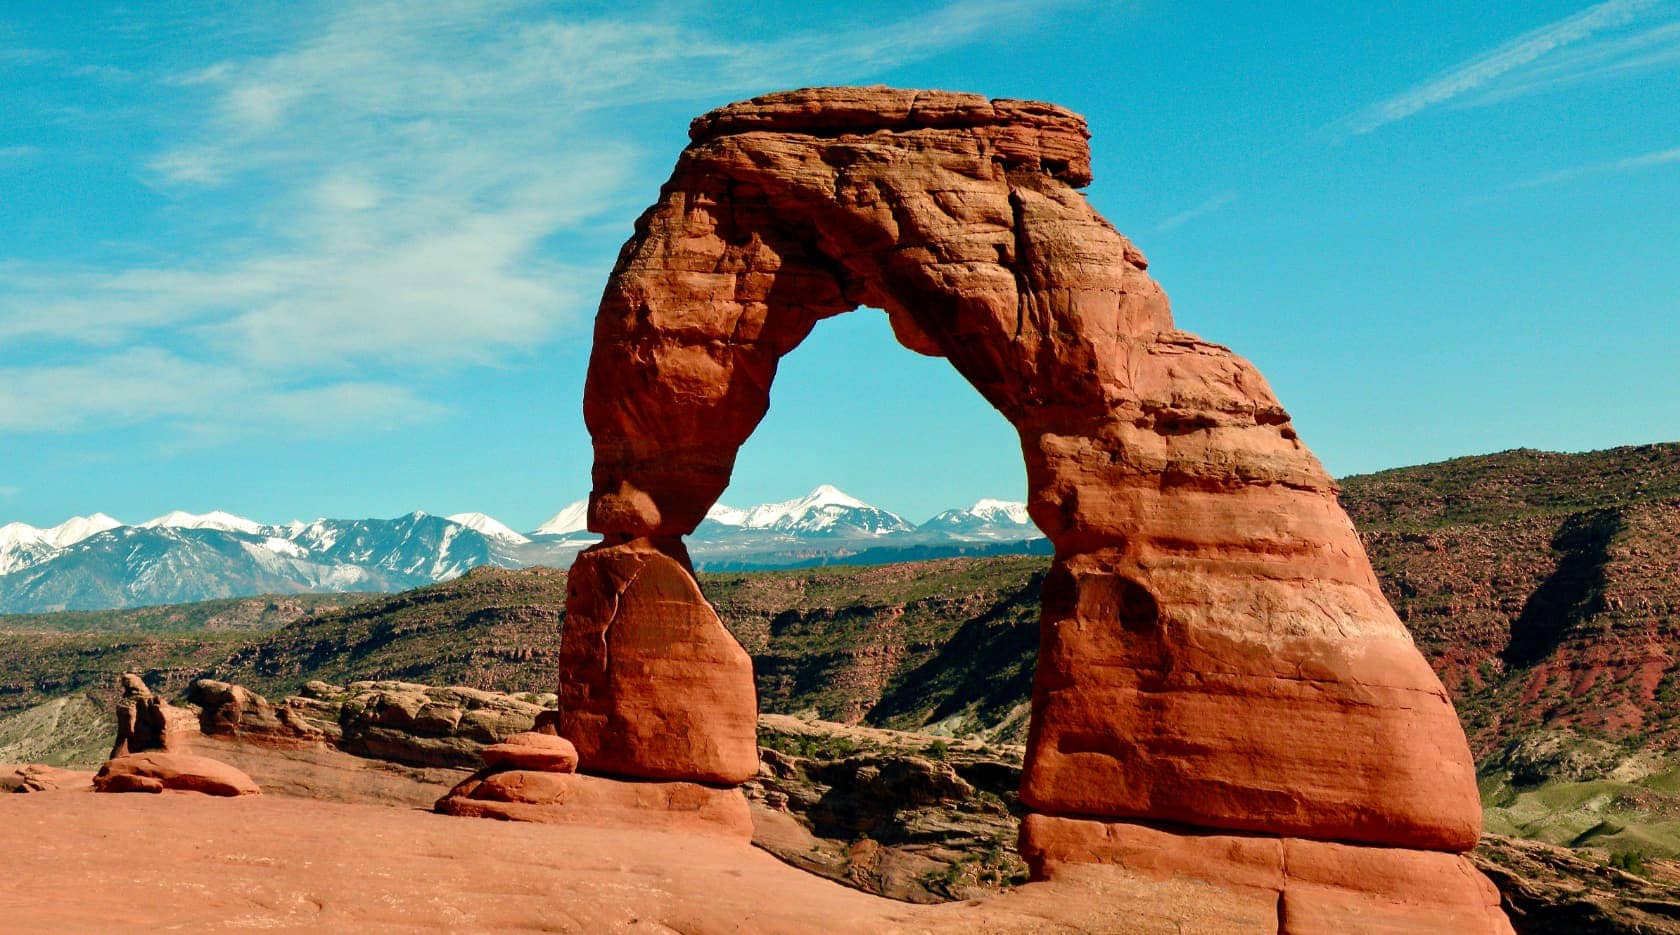 Red rock archway and snow covered mountains in the distance